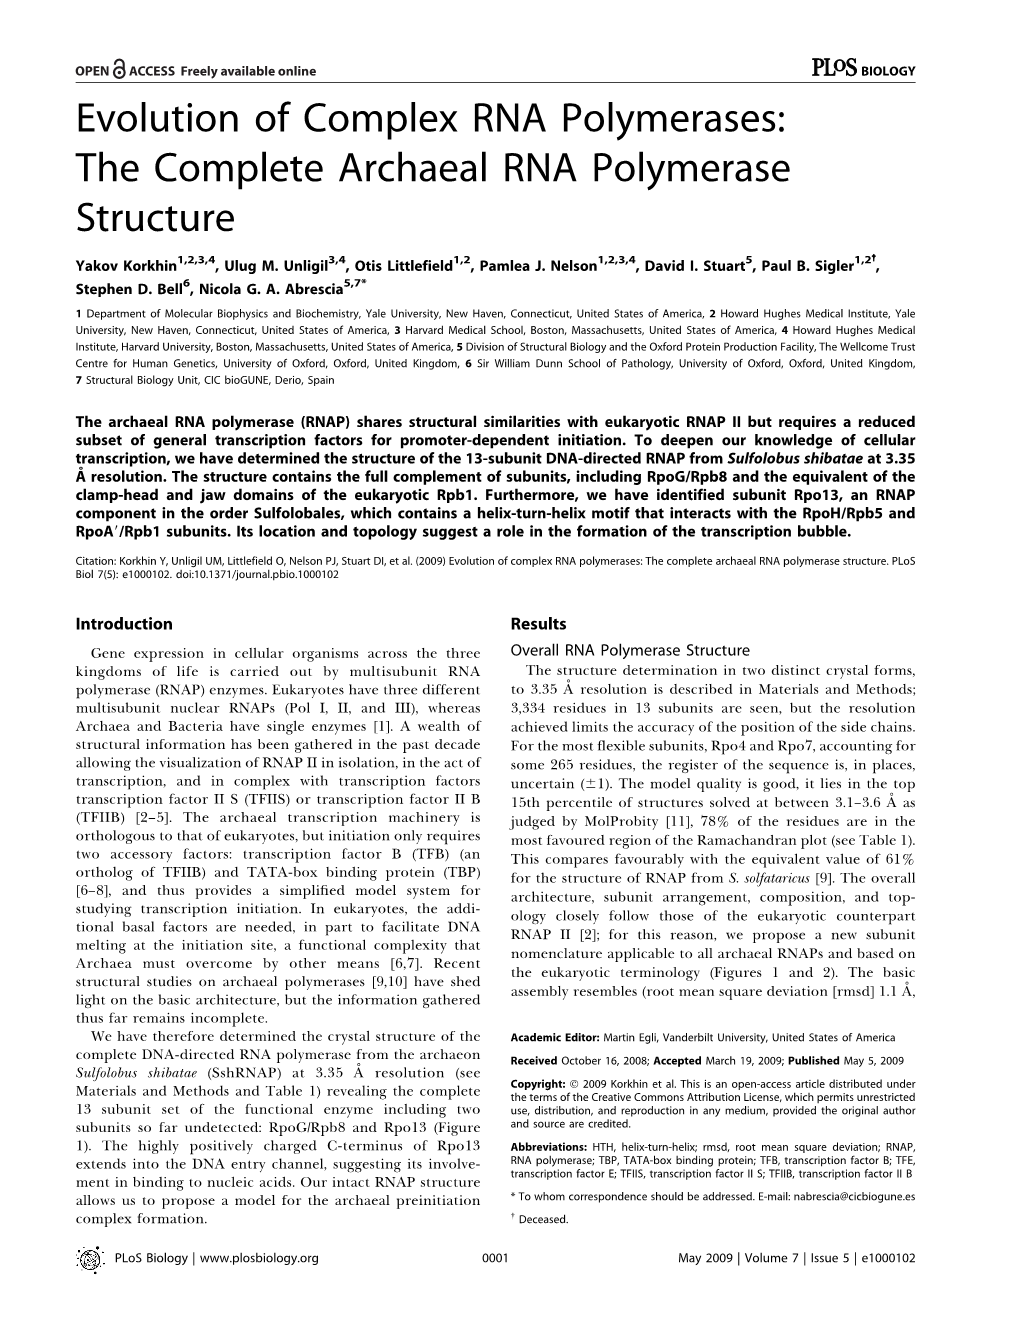 The Complete Archaeal RNA Polymerase Structure